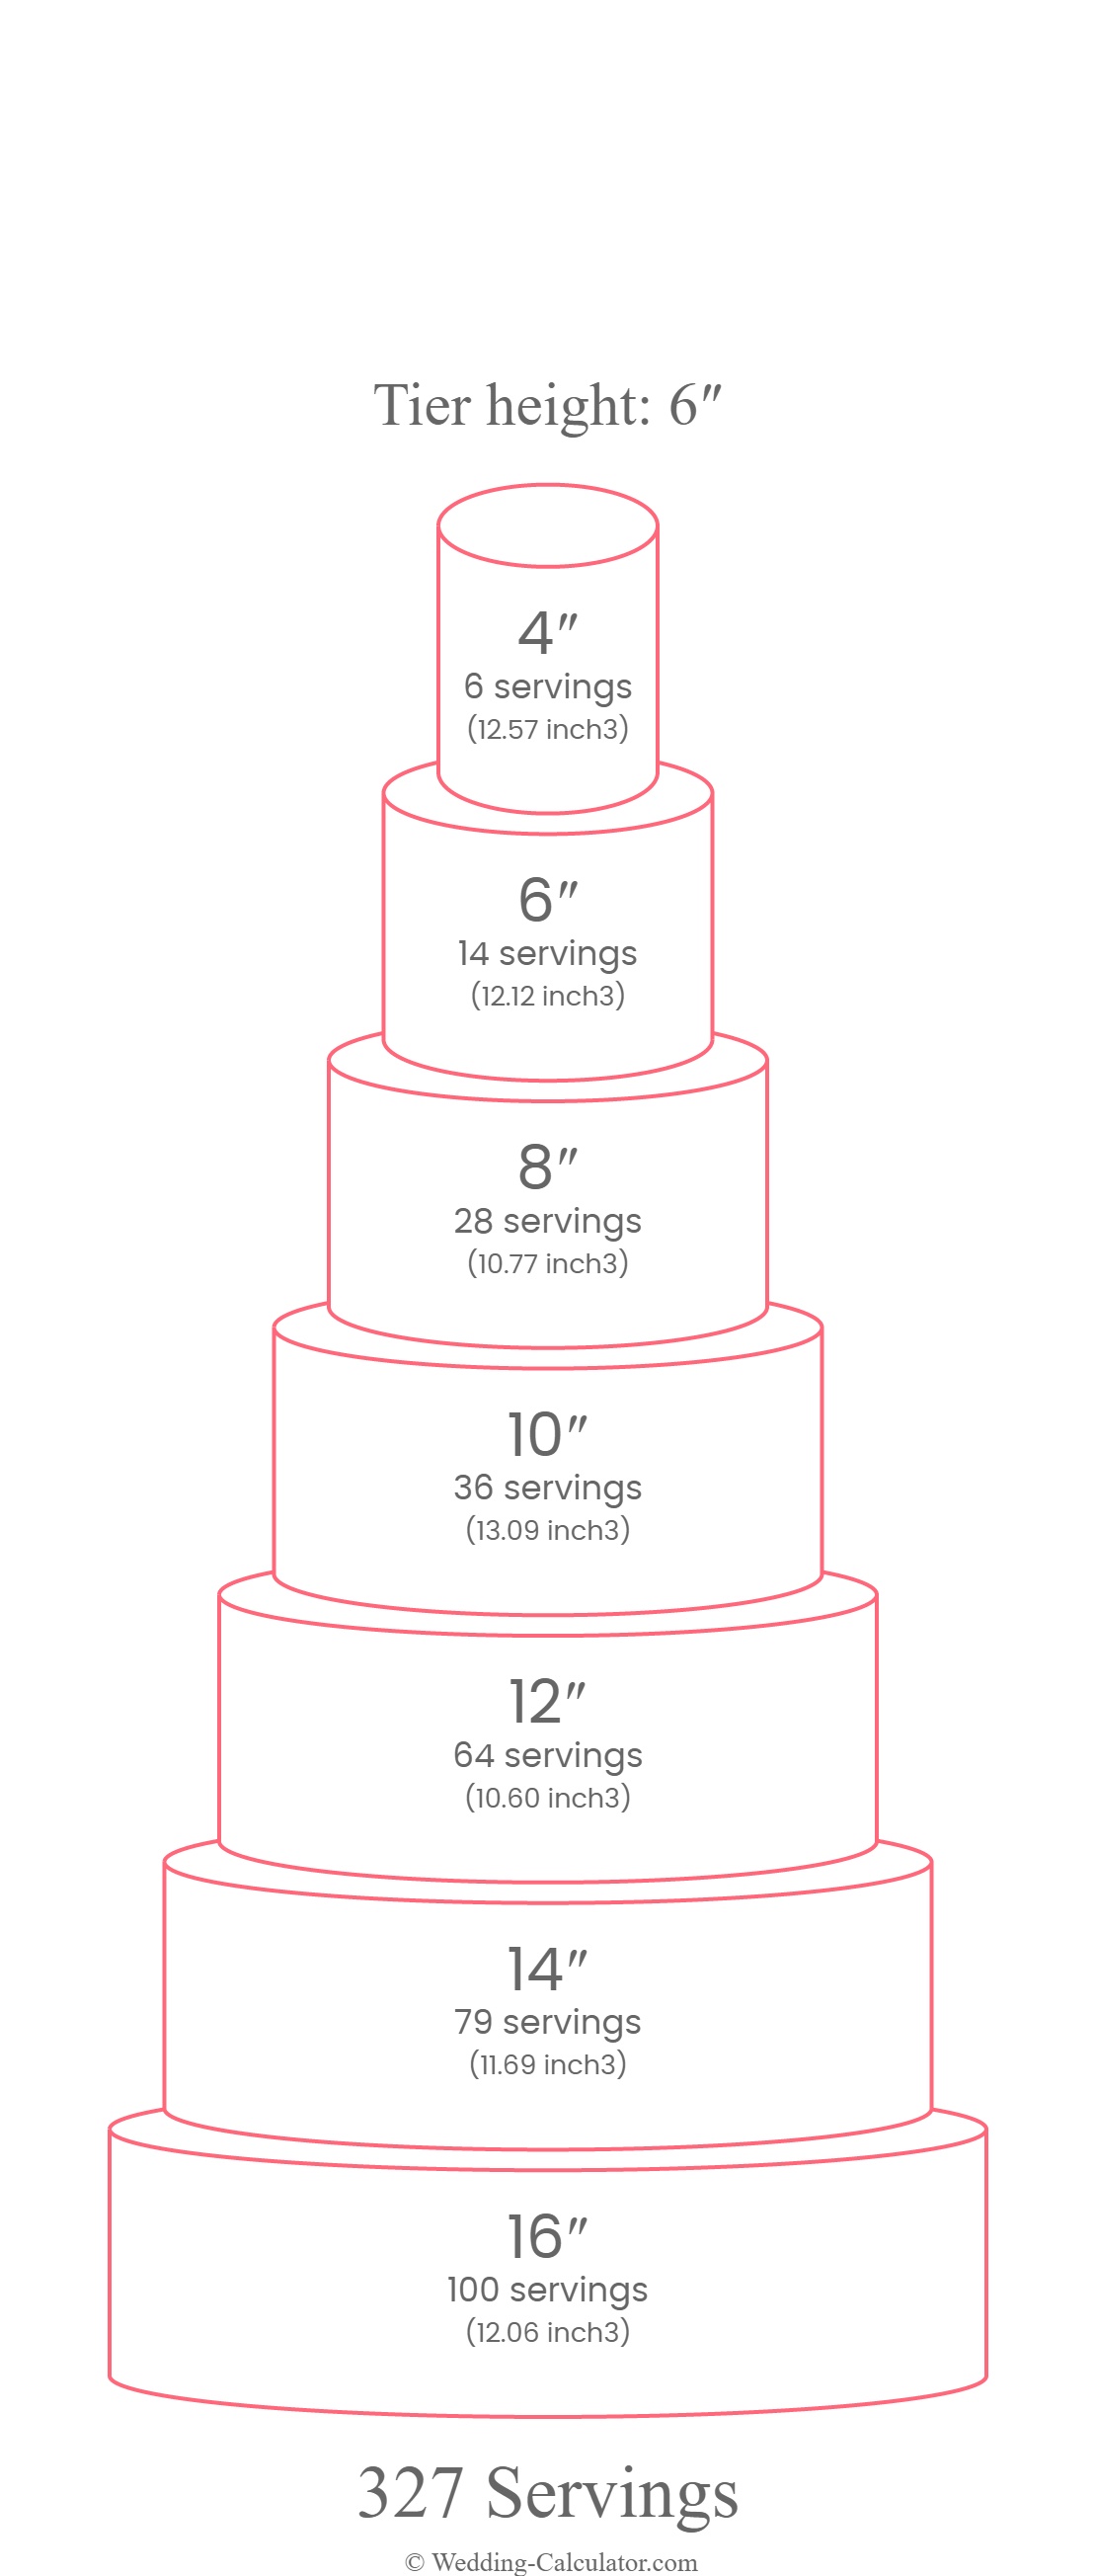 Servings chart for a round 7 tier wedding cake for 327 servings with 16″, 14″, 12″, 10″, 8″, 6″ & 4″ diameter tiers